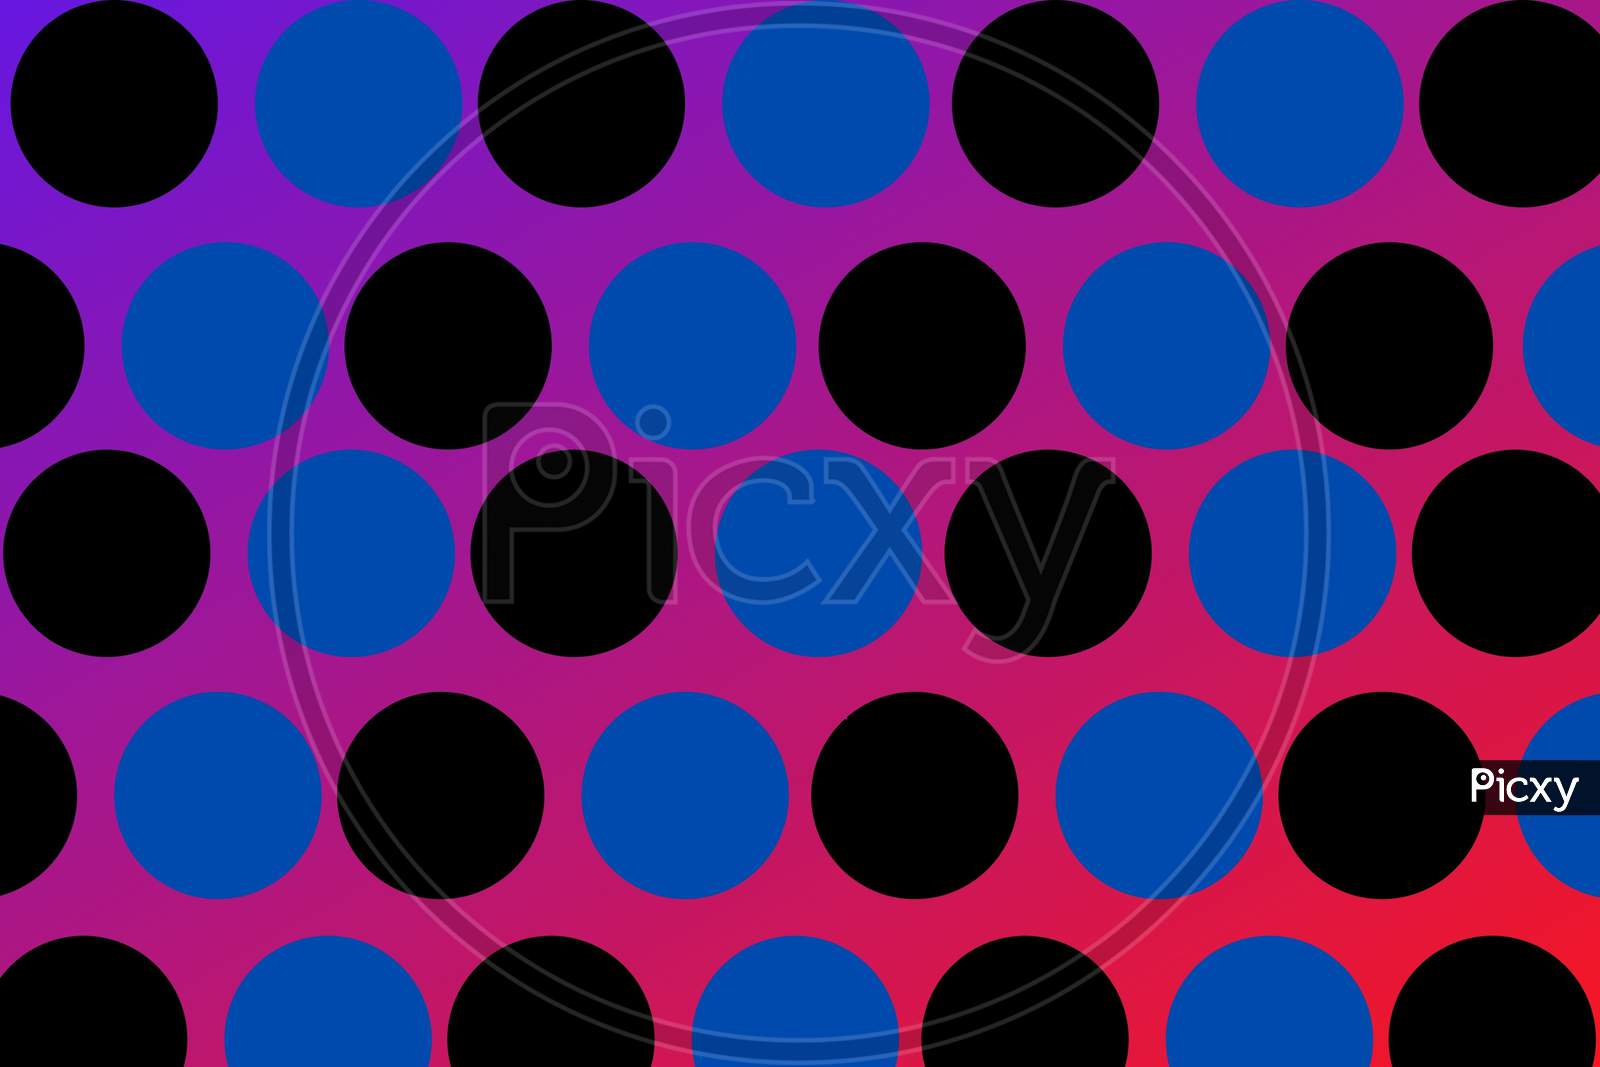 Circle Dark Abstract Or Illustration For Video Background